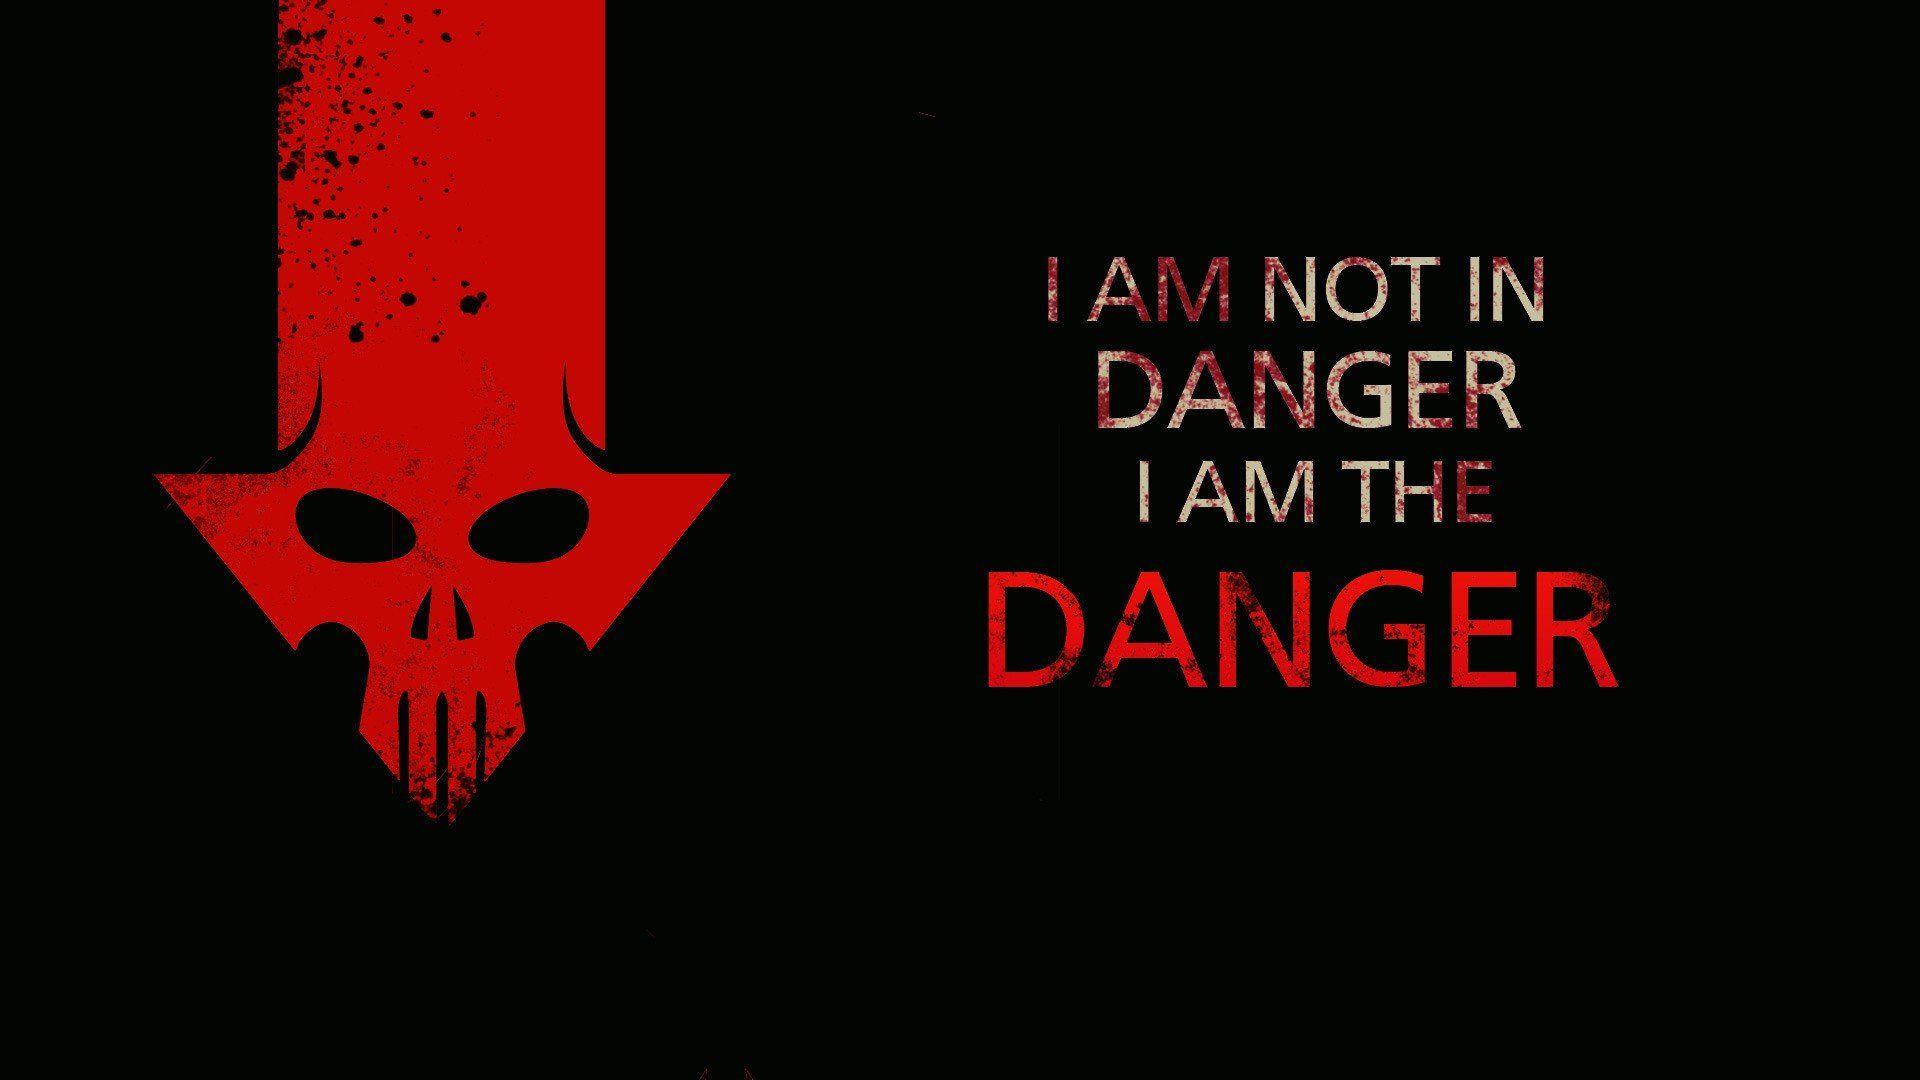 Danger Wallpaper, Danger Photo for Windows and Mac Systems